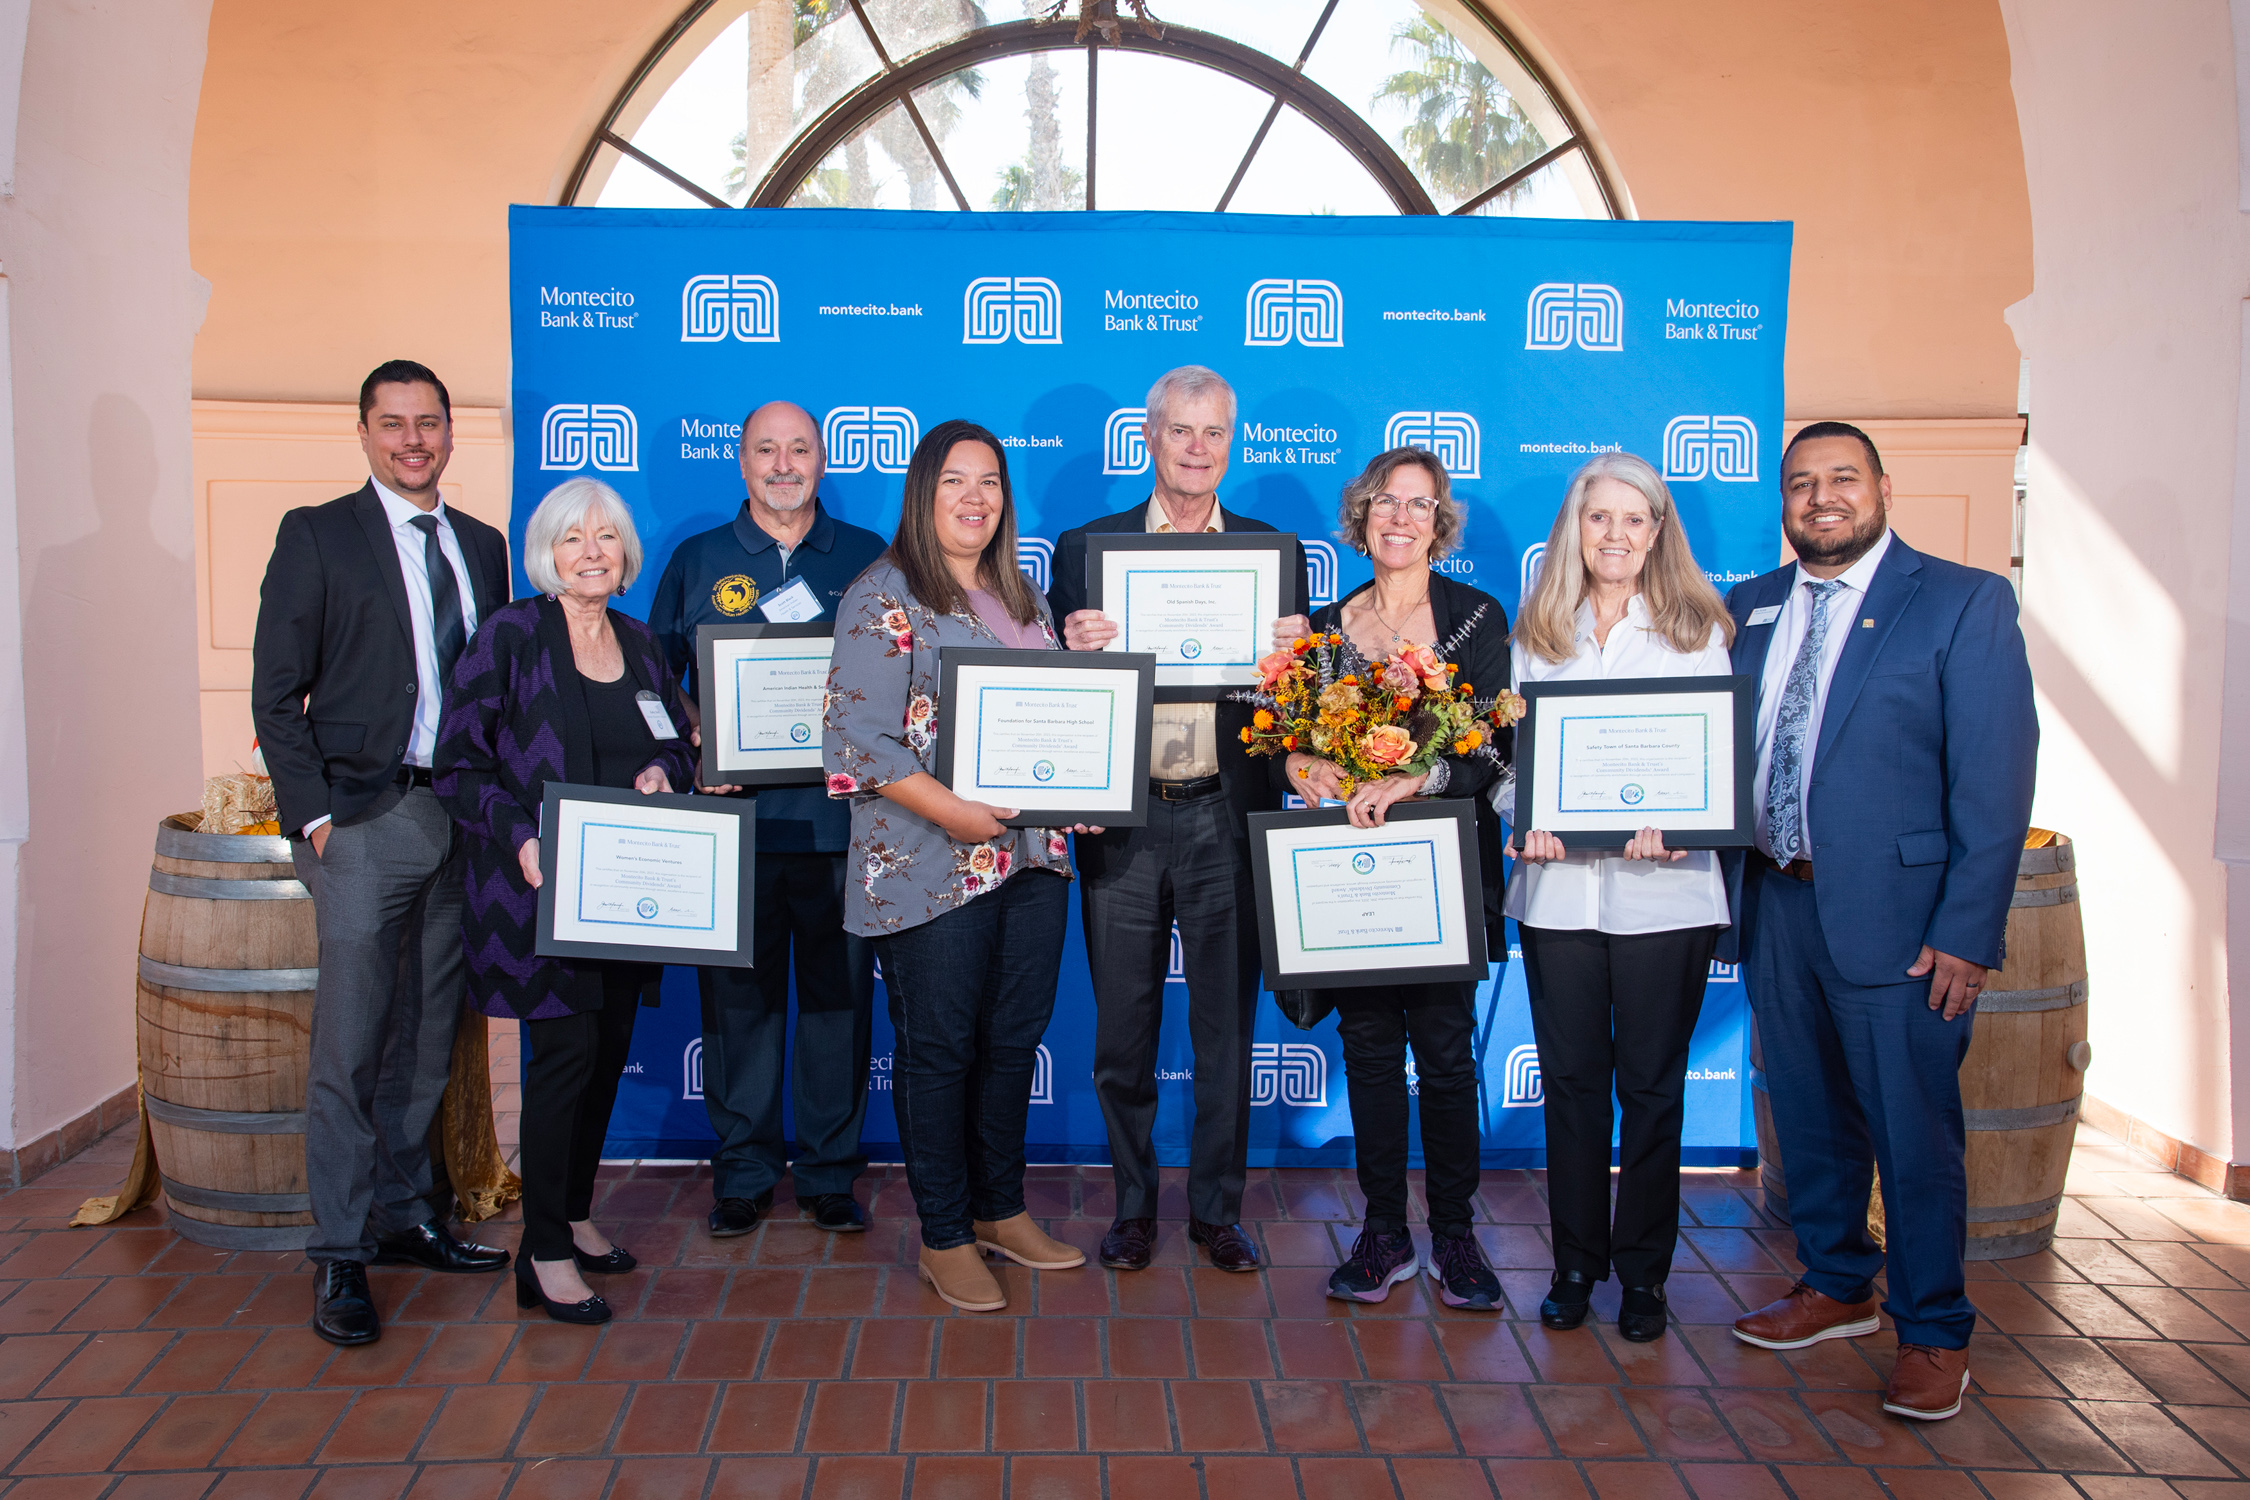 195 Local Nonprofit Organizations Receive Community Dividends® Awards and Share of $1.1 Million at Montecito Bank & Trust’s 21st Annual Luncheon